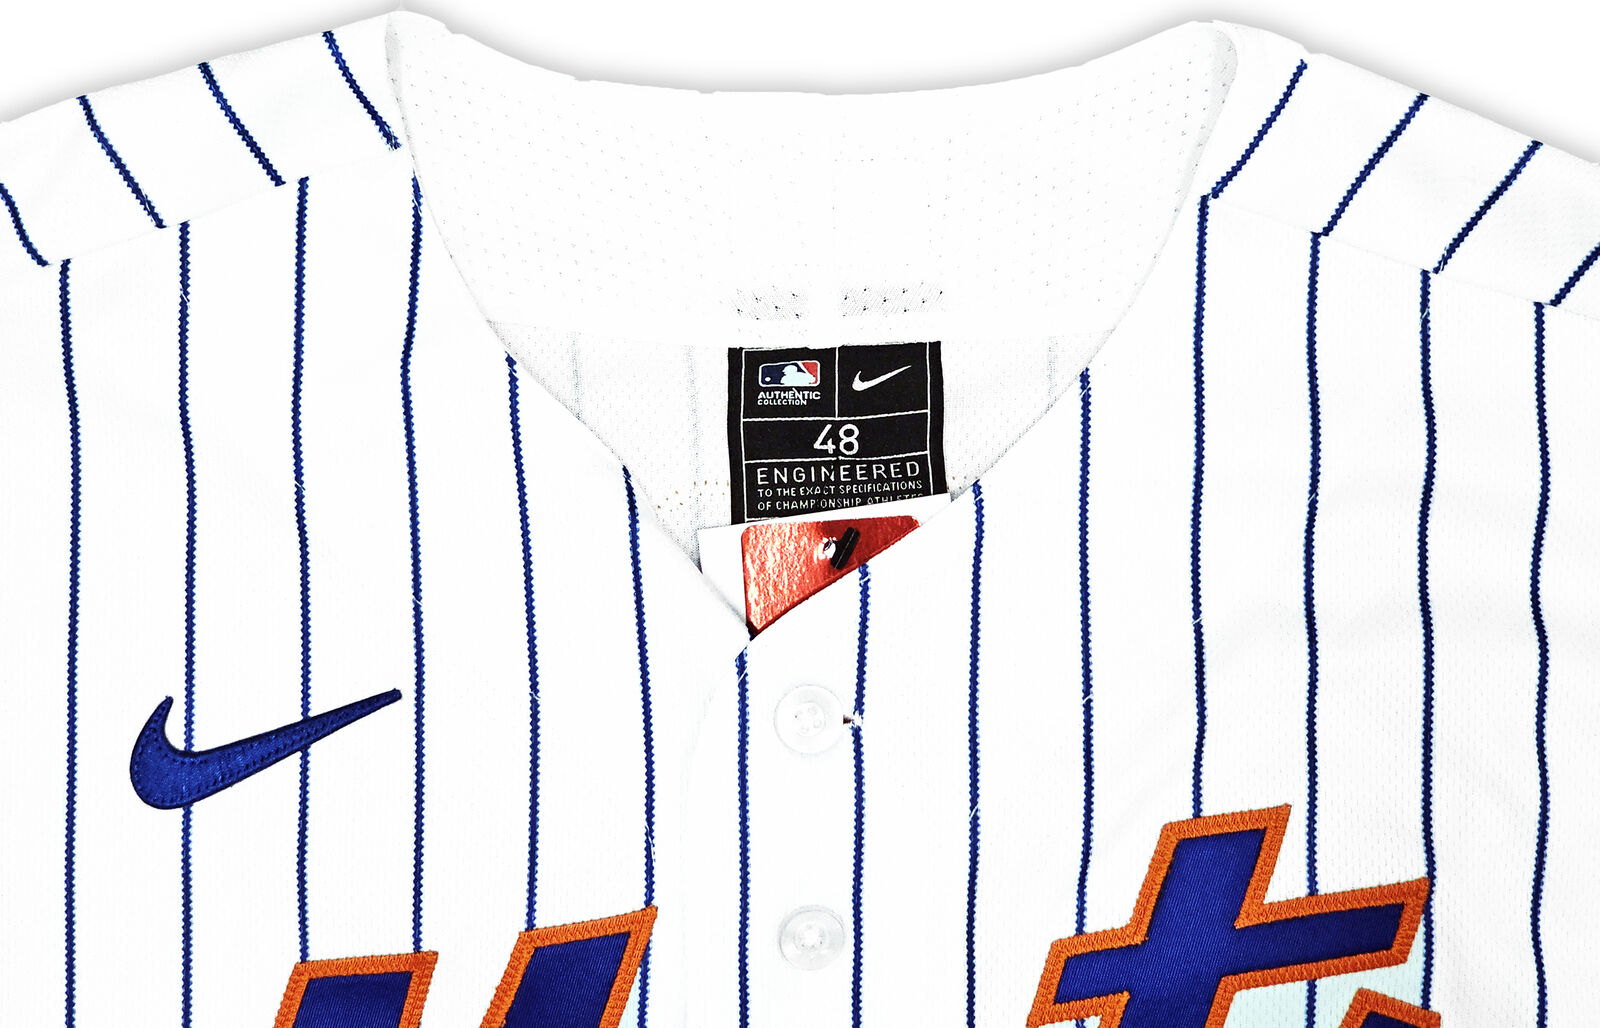 Jacob deGrom New York Mets Fanatics Authentic Autographed Nike White  Authentic Jersey